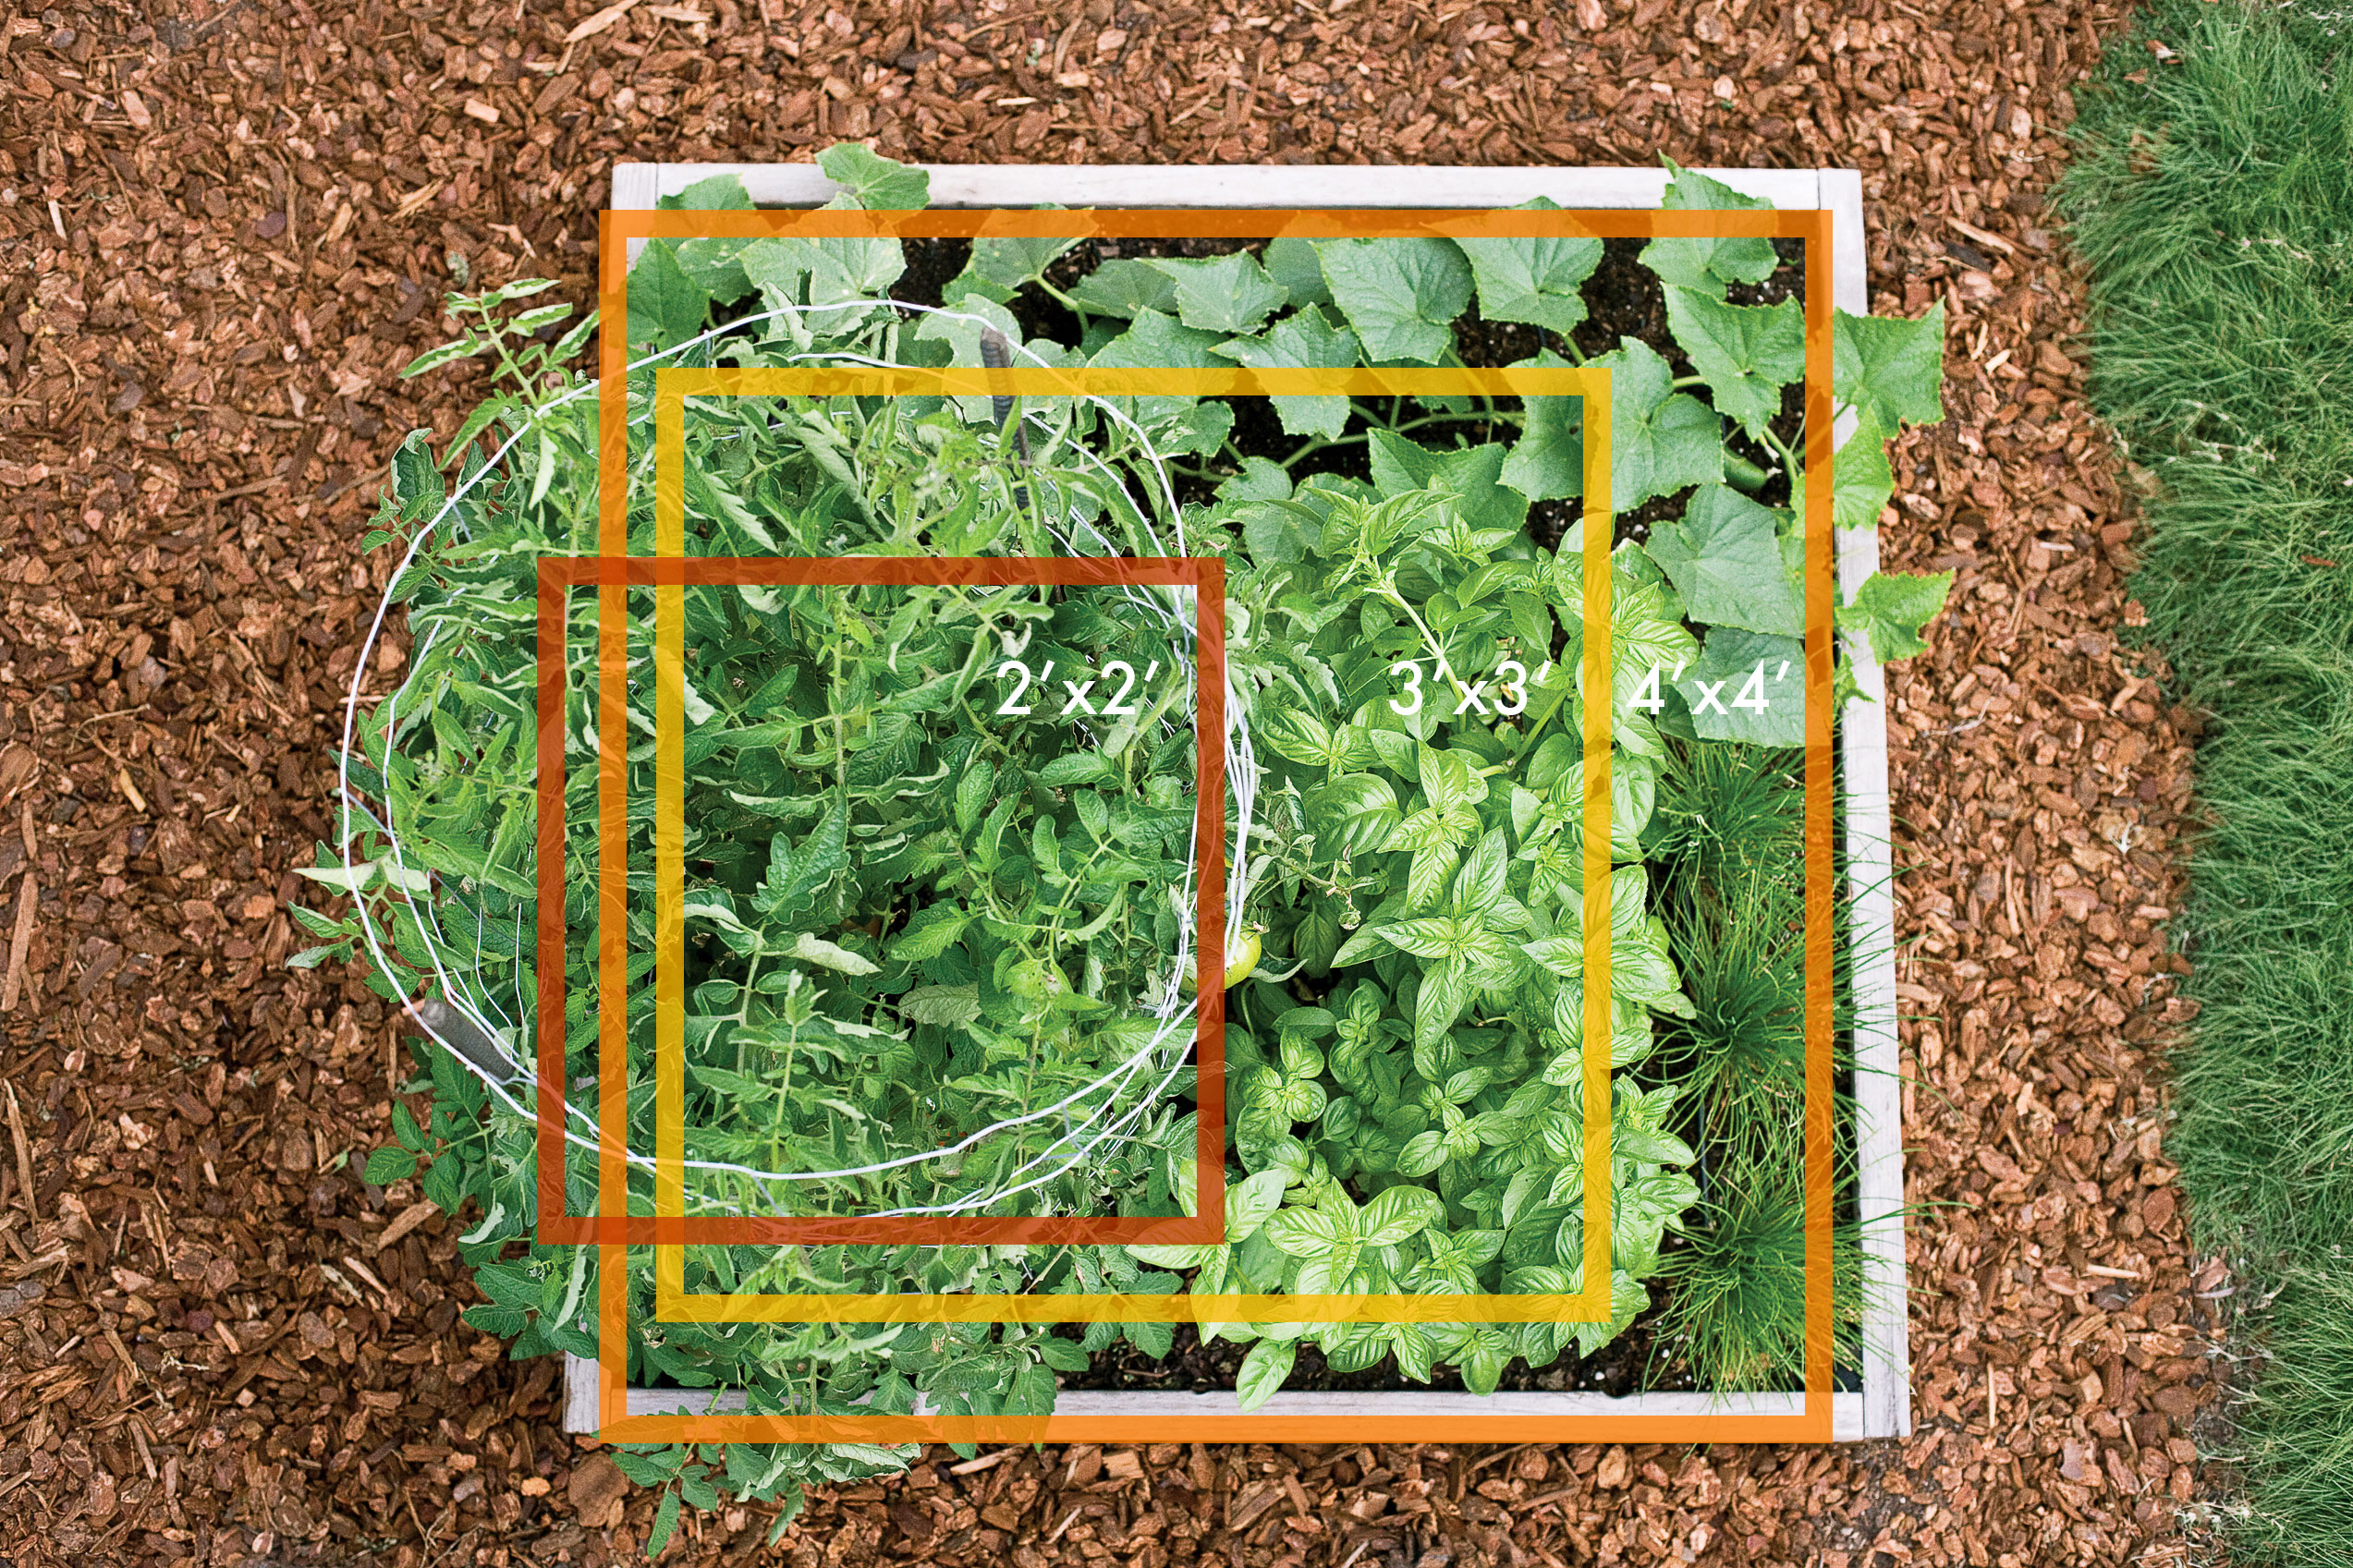 How to Grow Veggies in 2–4 Square Feet